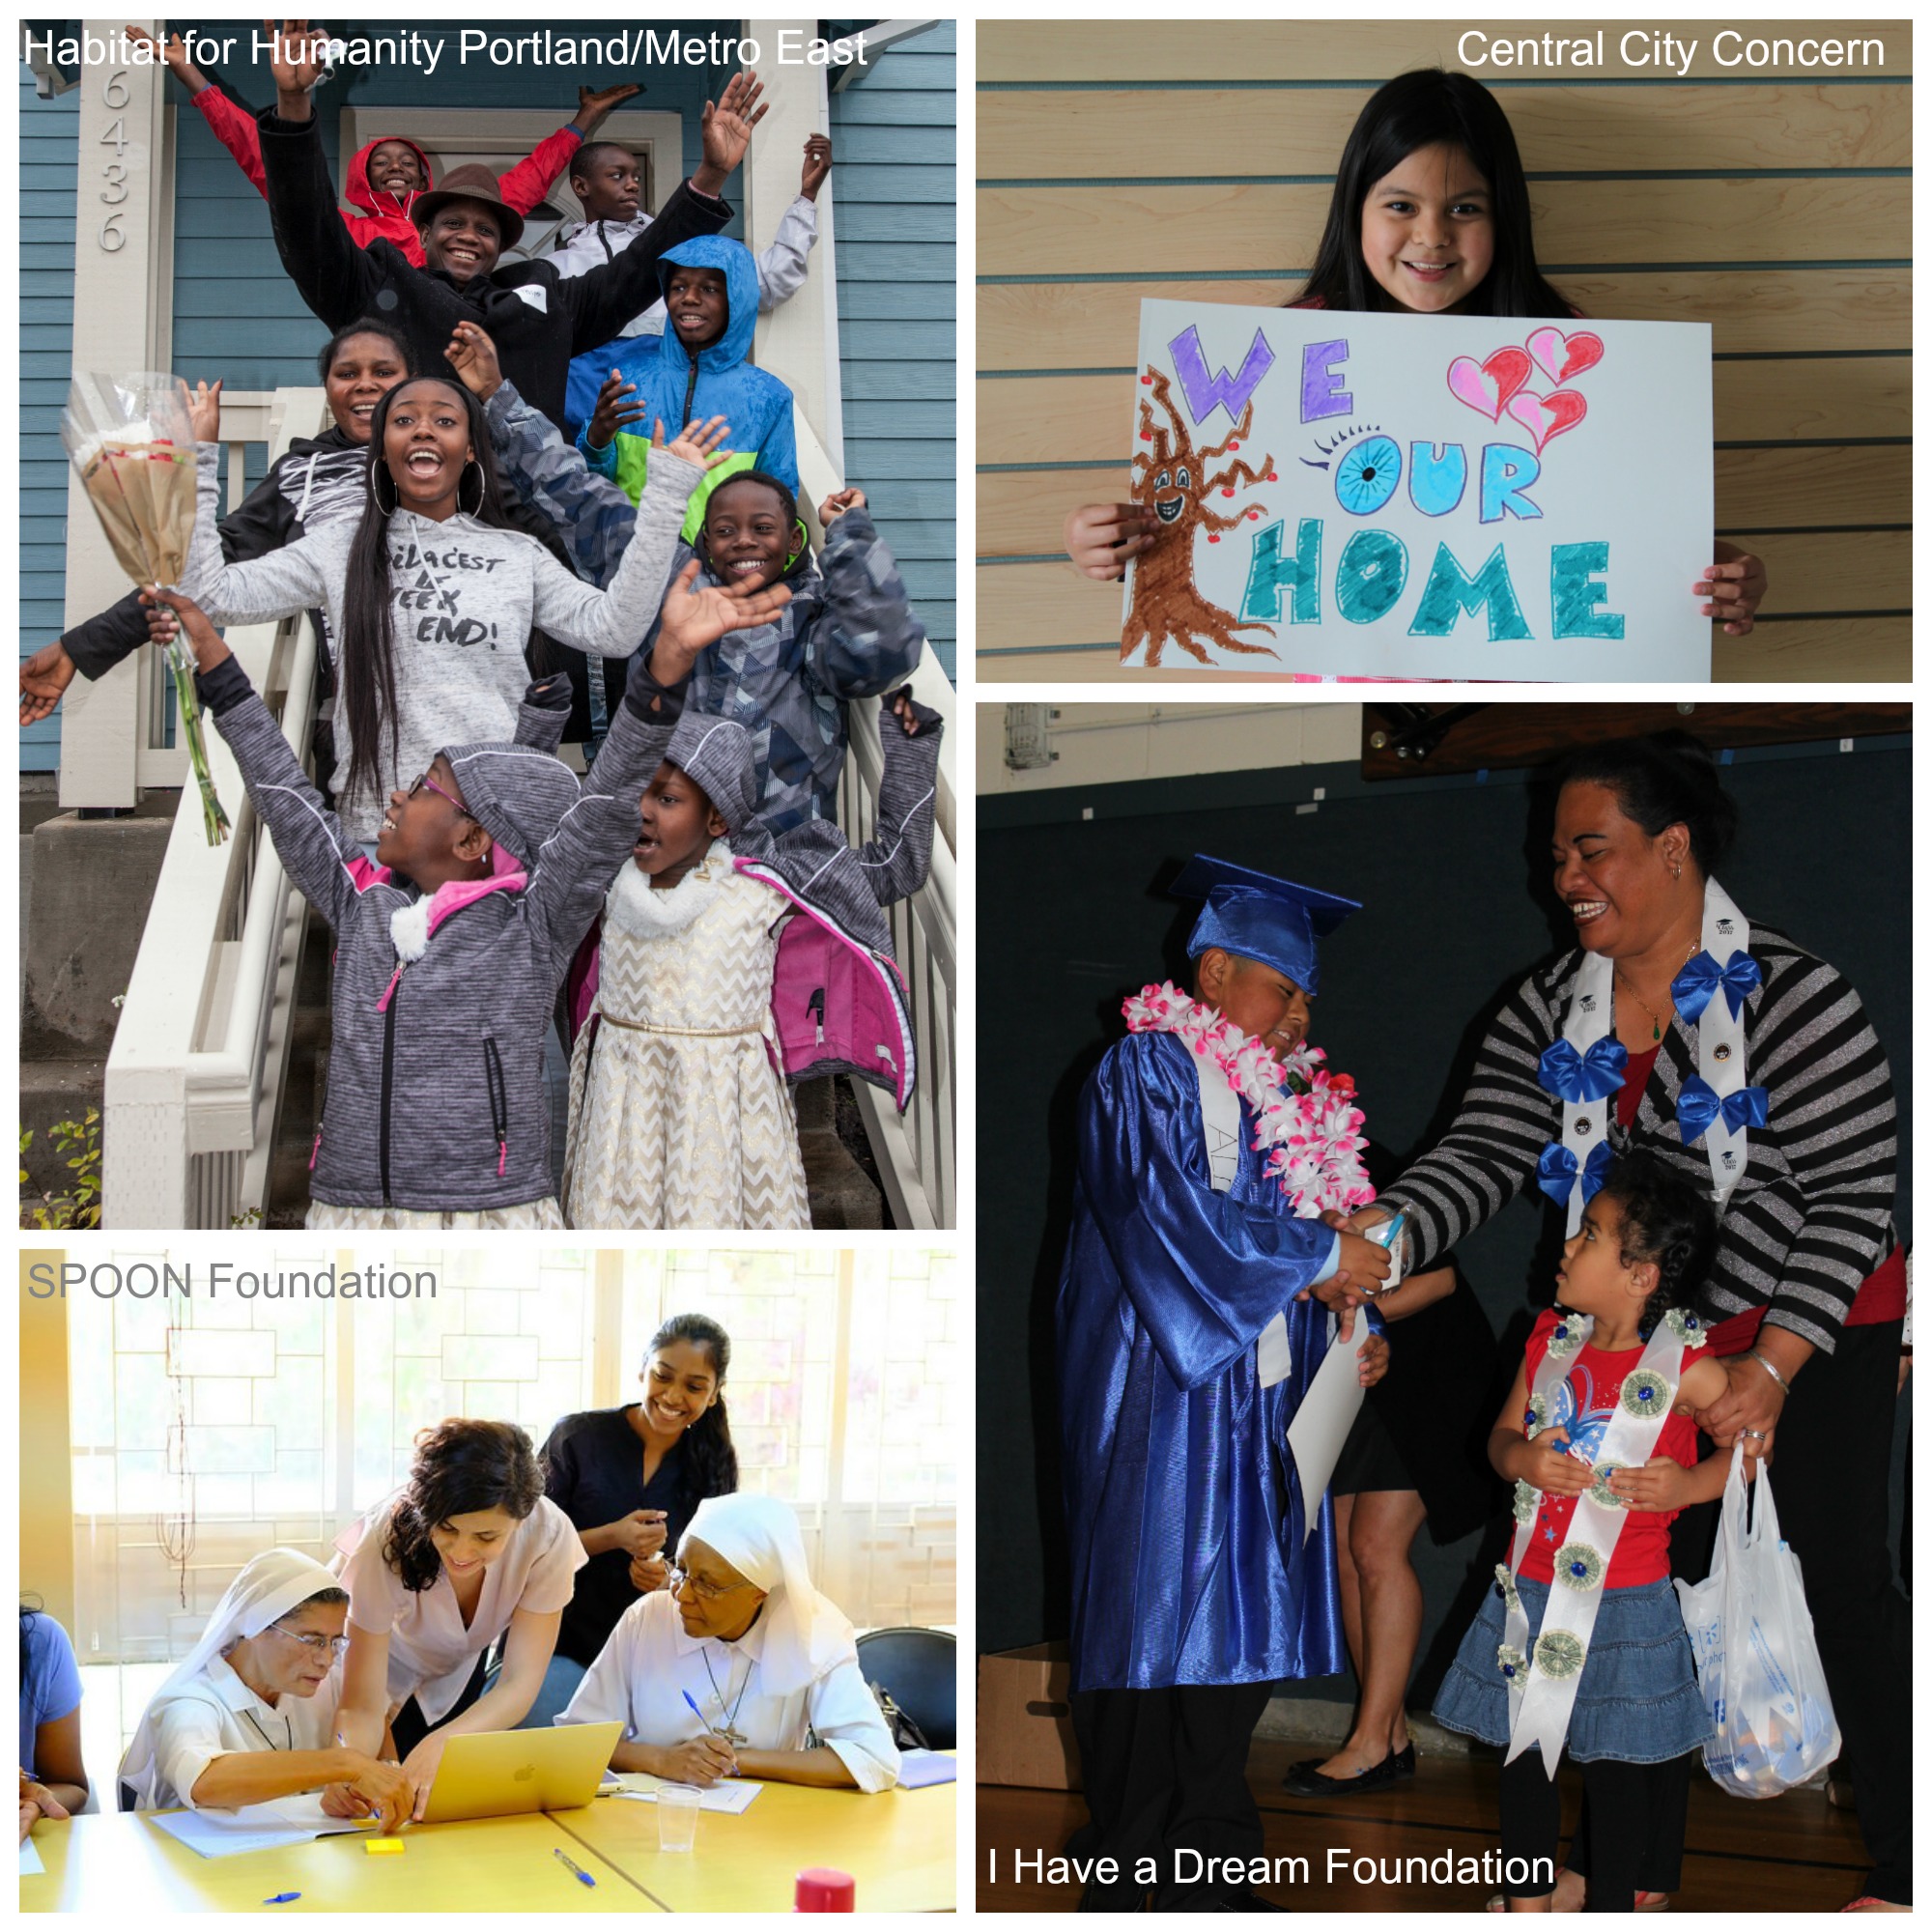 Image 1: a group of adults and children cheer for the camera while standing on front porch stairs. Text overlay says "Habitat for Humanity Portland/Metro East." Image 2: Four people, two of them in nun's habits, work on something together at a table. Text overlay says "SPOON Foundation." Image 3: a young girl with straight black hair smiles for the camera while holding a sign that says "We Heart Our Home." Text overlay says "Central City Concern. " Image 4: A man shakes hands with a student wearing a graduation cap, gown, and lei while a young girl looks up at them. Text overlay says "I Have a Dream Foundation." 